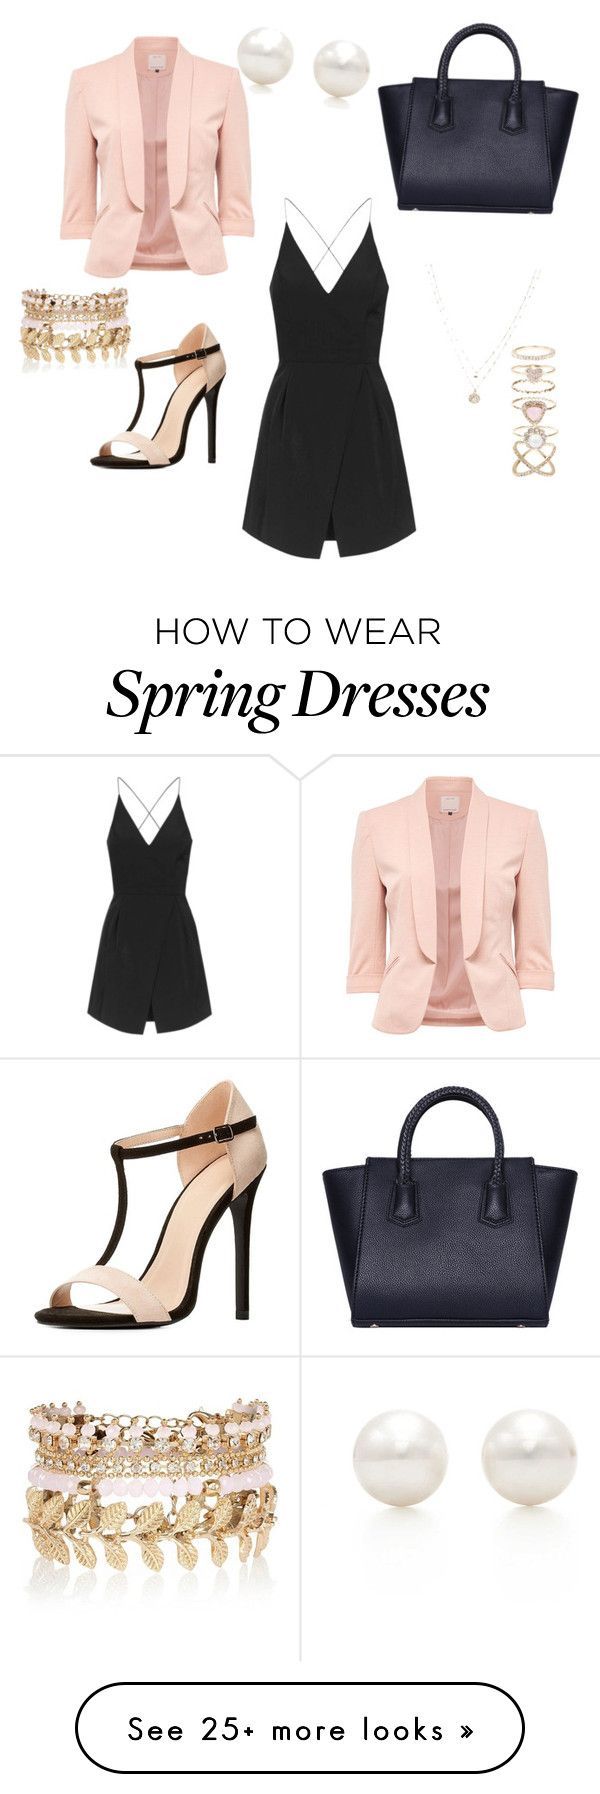 “Spring 2016” by jdvinecourt on Polyvore featuring Charlotte Russe, Topshop, LC Lauren Conrad, Accessorize, River Island and